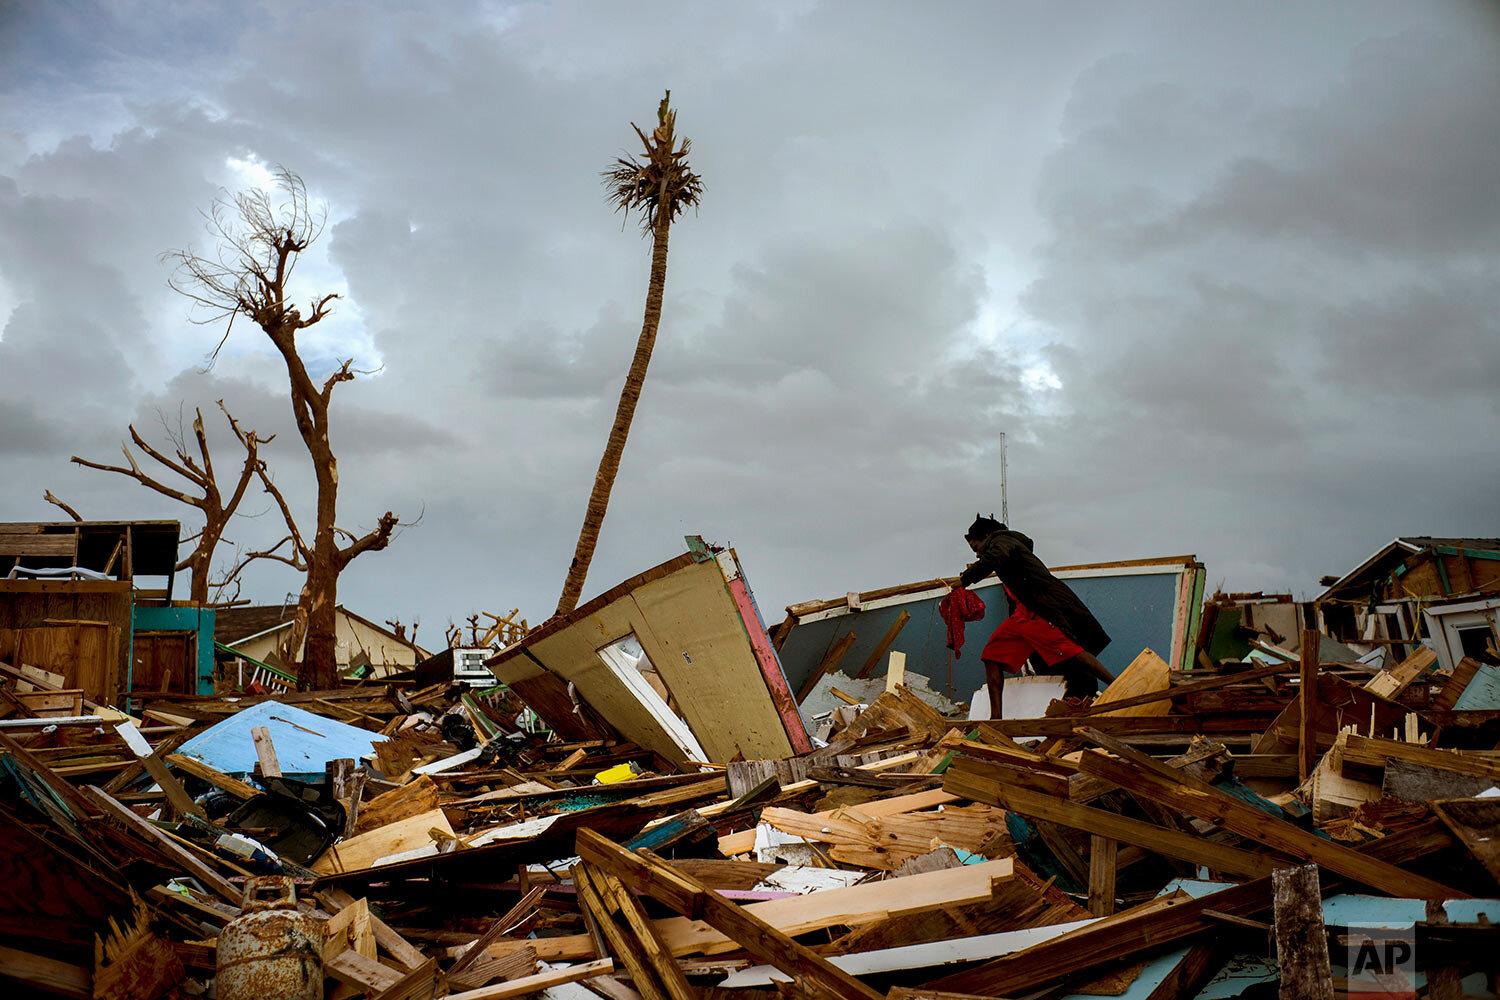  Vladimir Safford an immigrant from Haiti walks through the rubble next to his home in the aftermath of Hurricane Dorian in Abaco, Bahamas, Monday, Sept. 16, 2019. (AP Photo/Ramon Espinosa) 